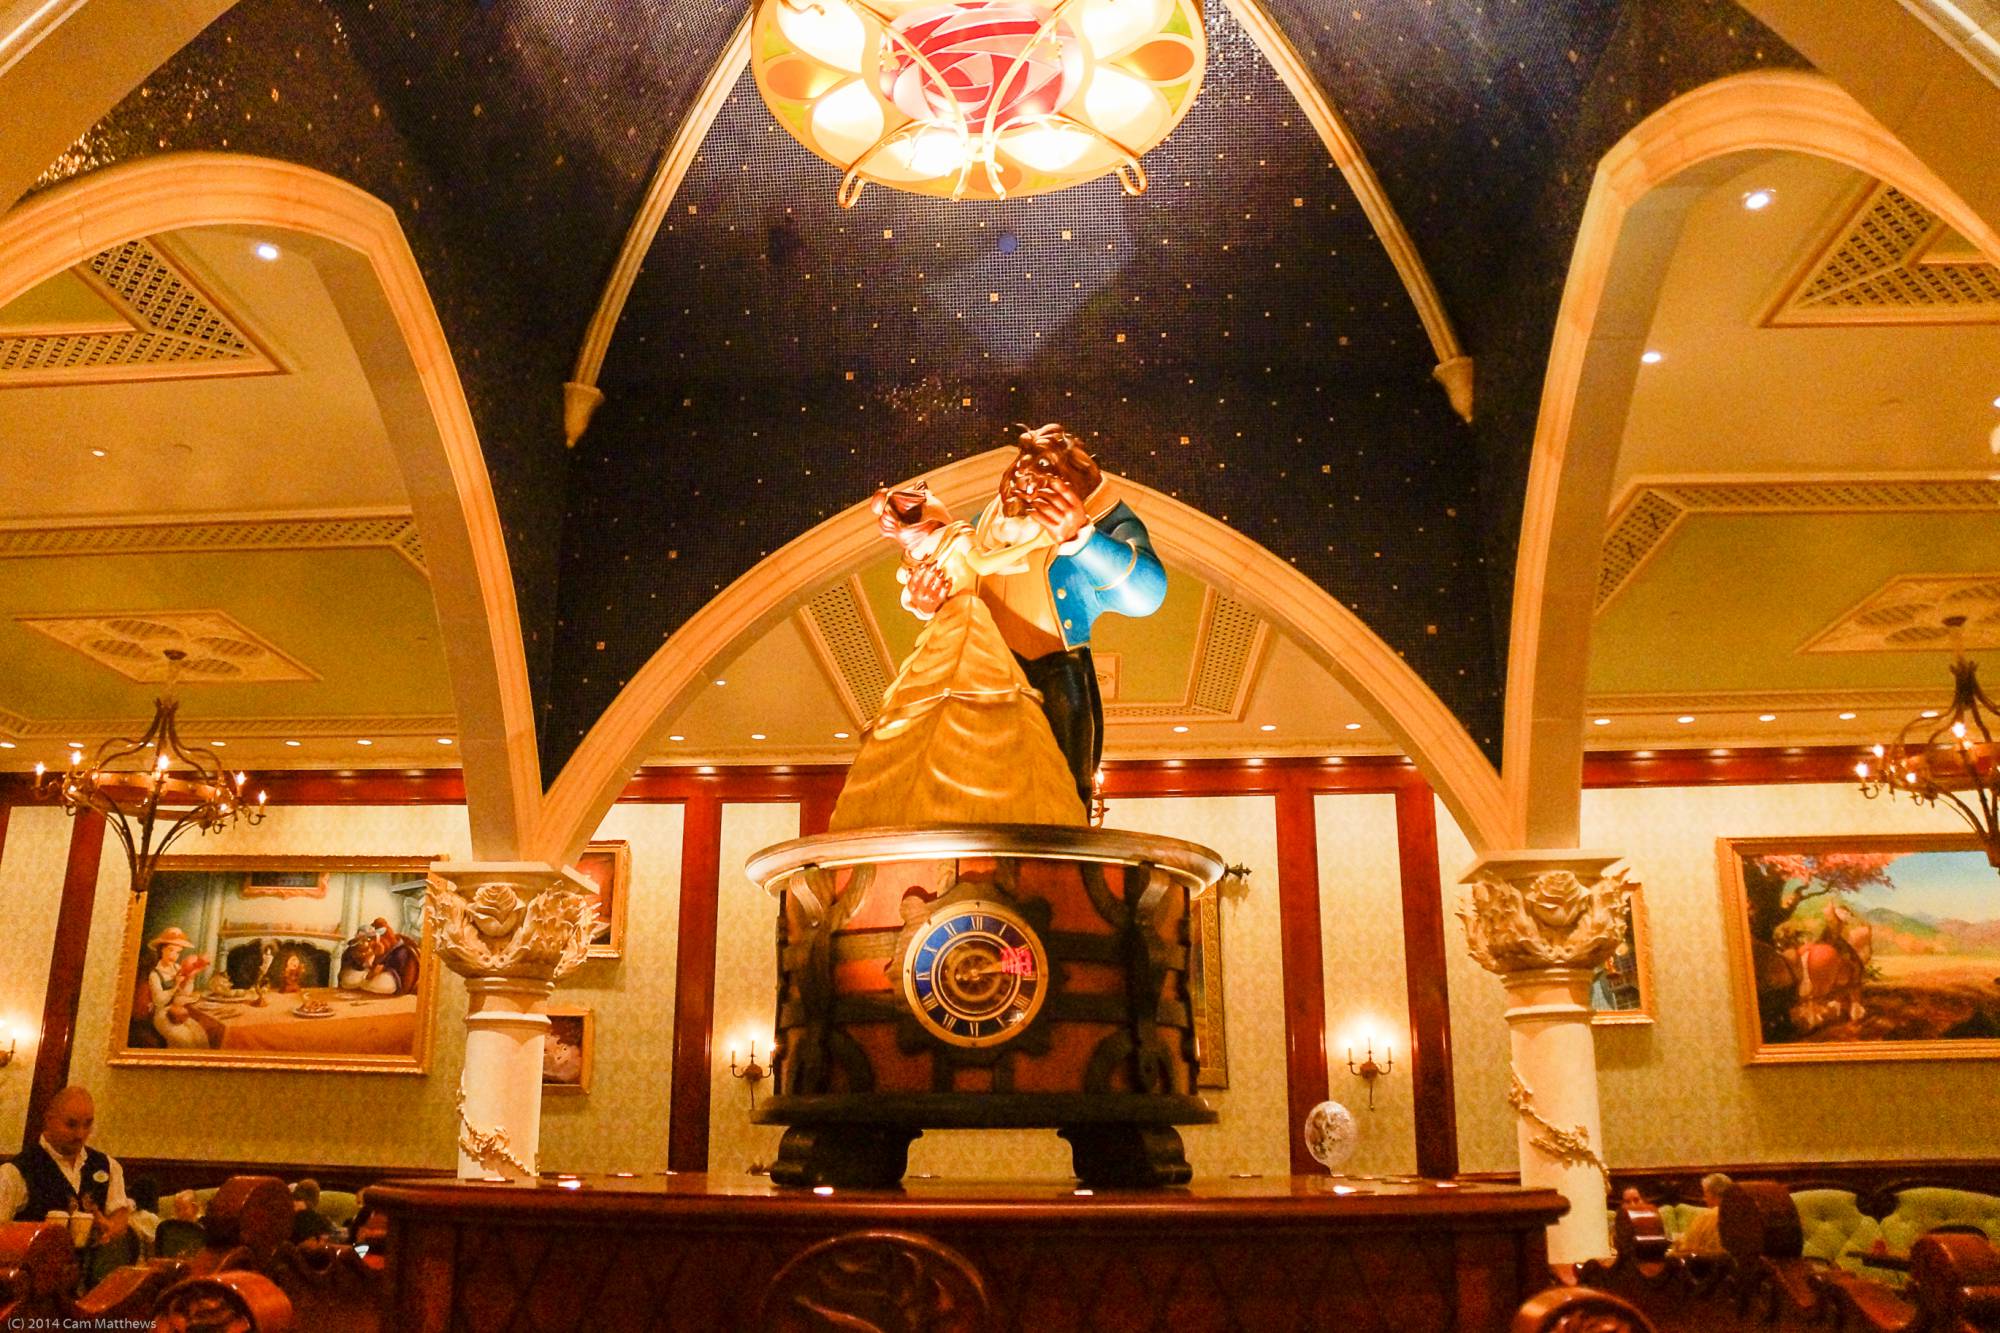 Enjoy le petit dejeuner (breakfast) at Be Our Guest in the Magic Kingdom |PassPorter.com